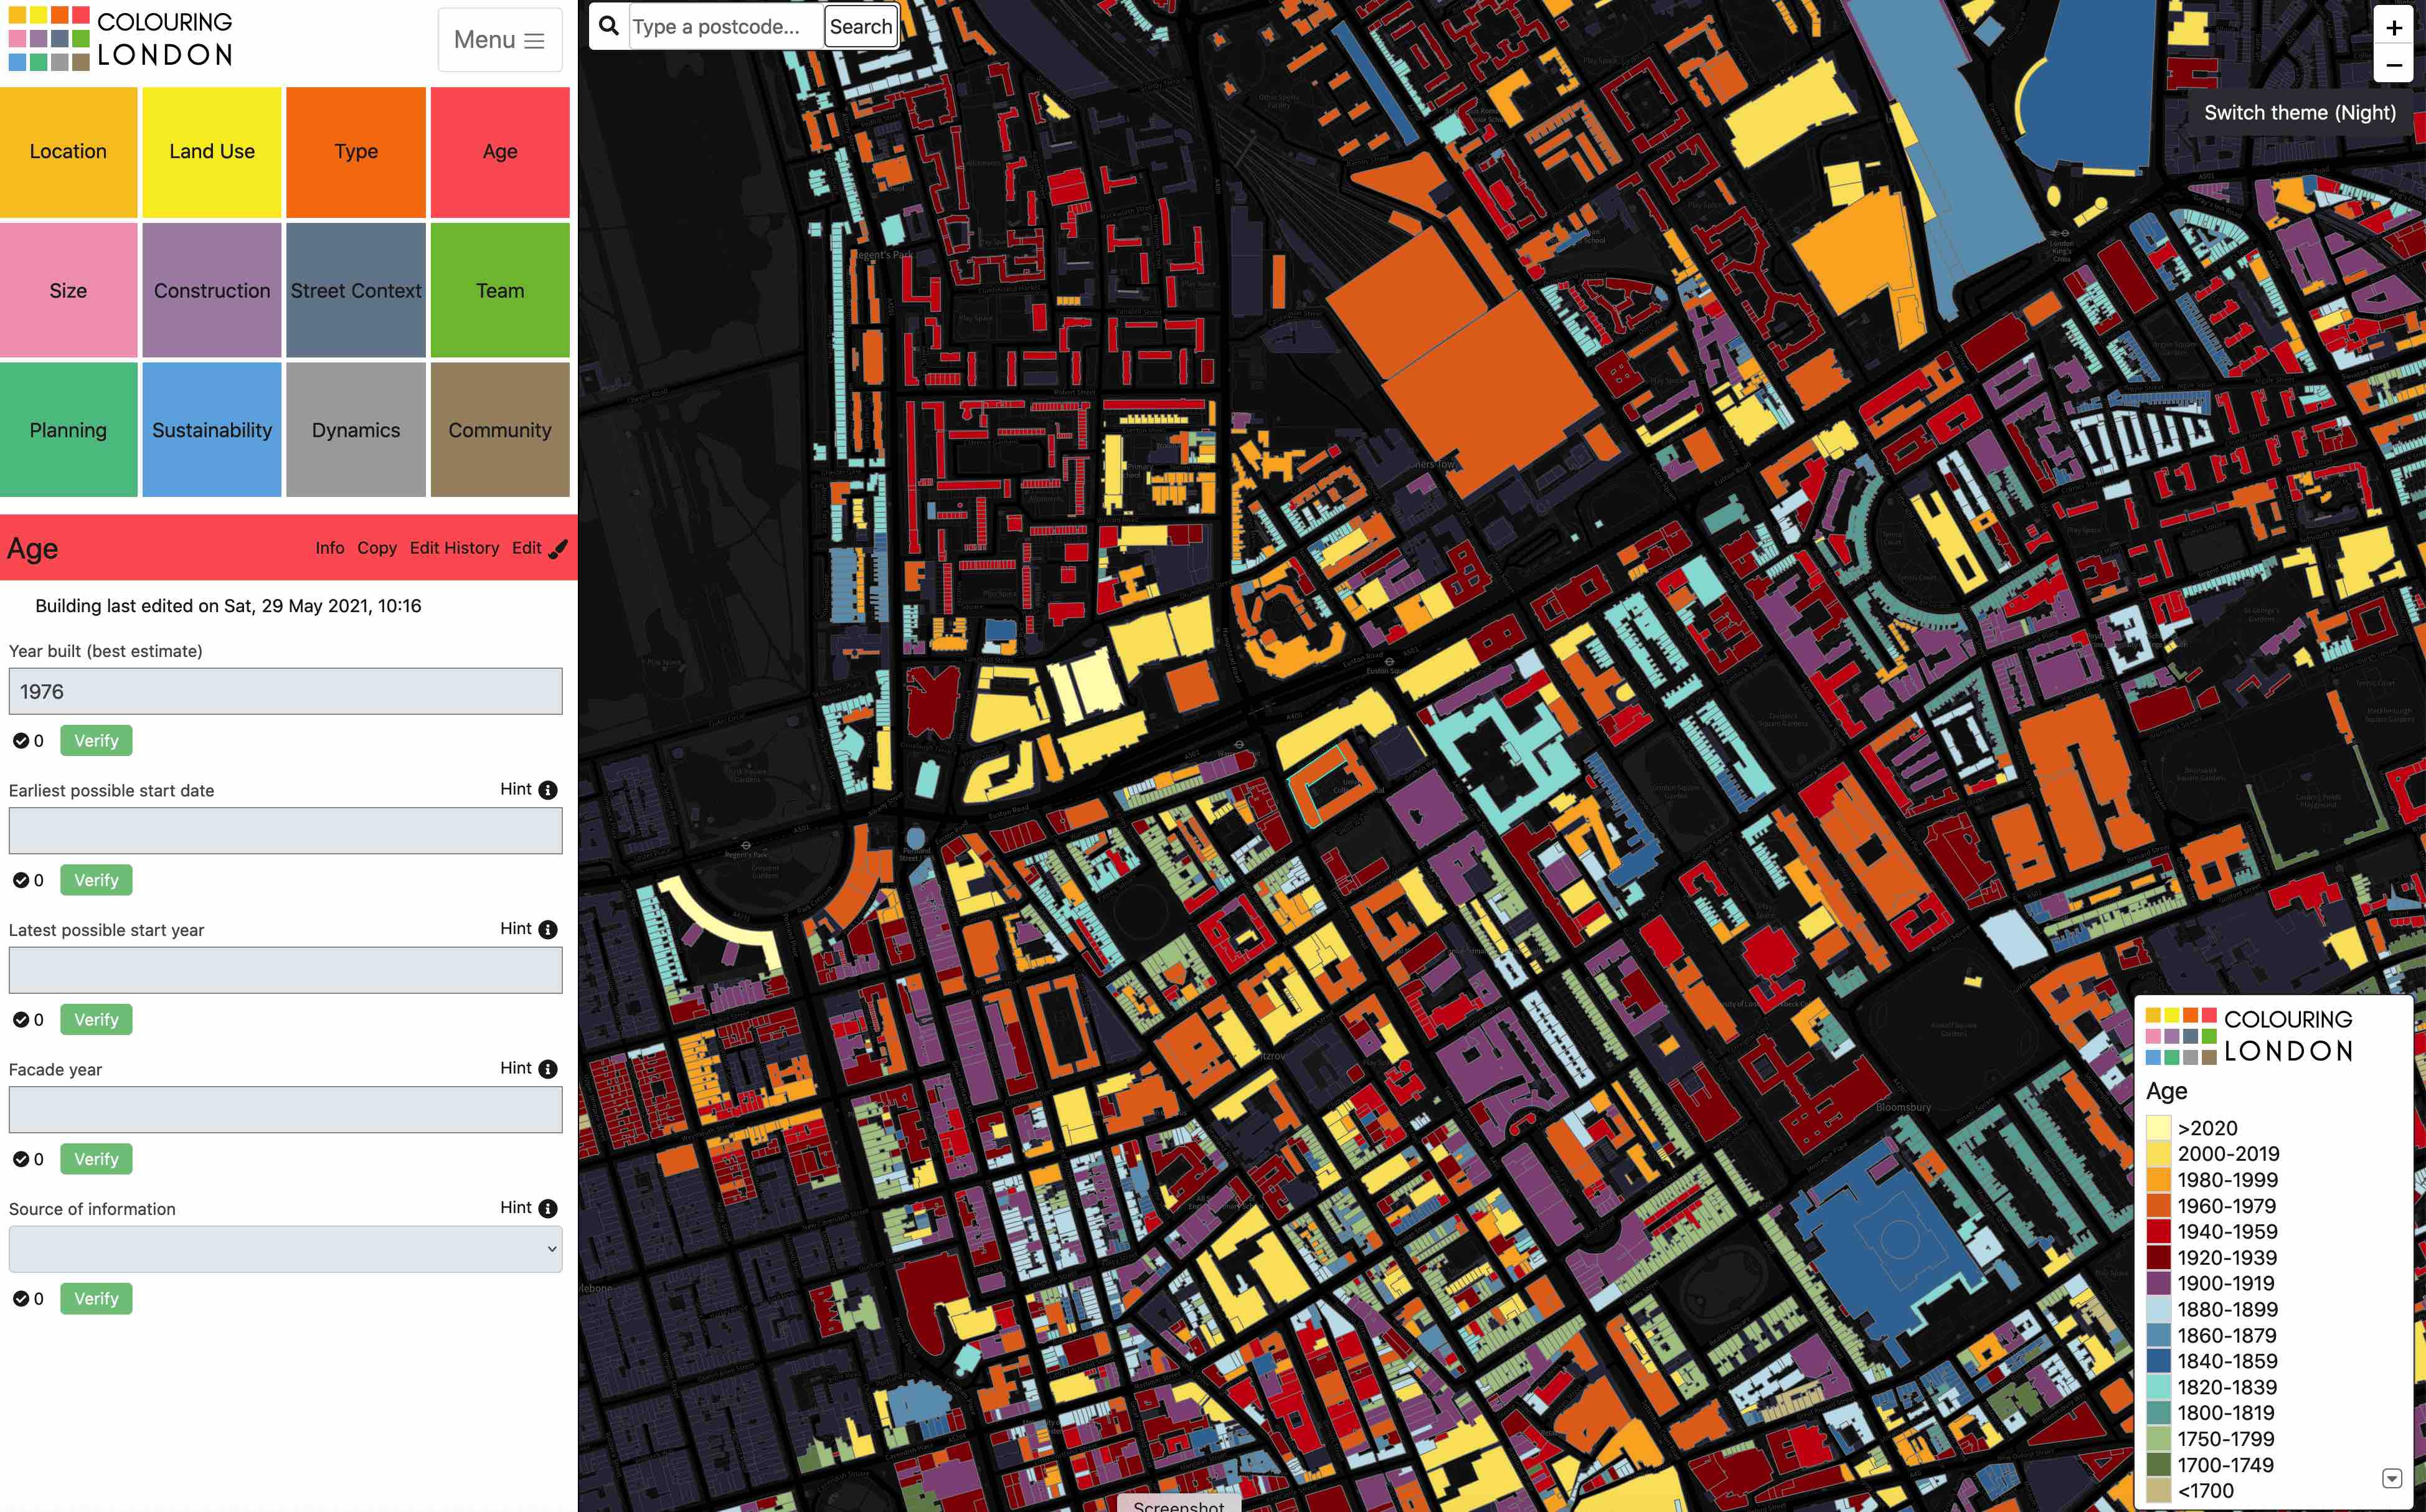 <em><strong>The Colouring London web interface in 2022.</strong> Left: the 12 main types of data collected and the input panel for age data. Right: the visualisation of building age.</em>